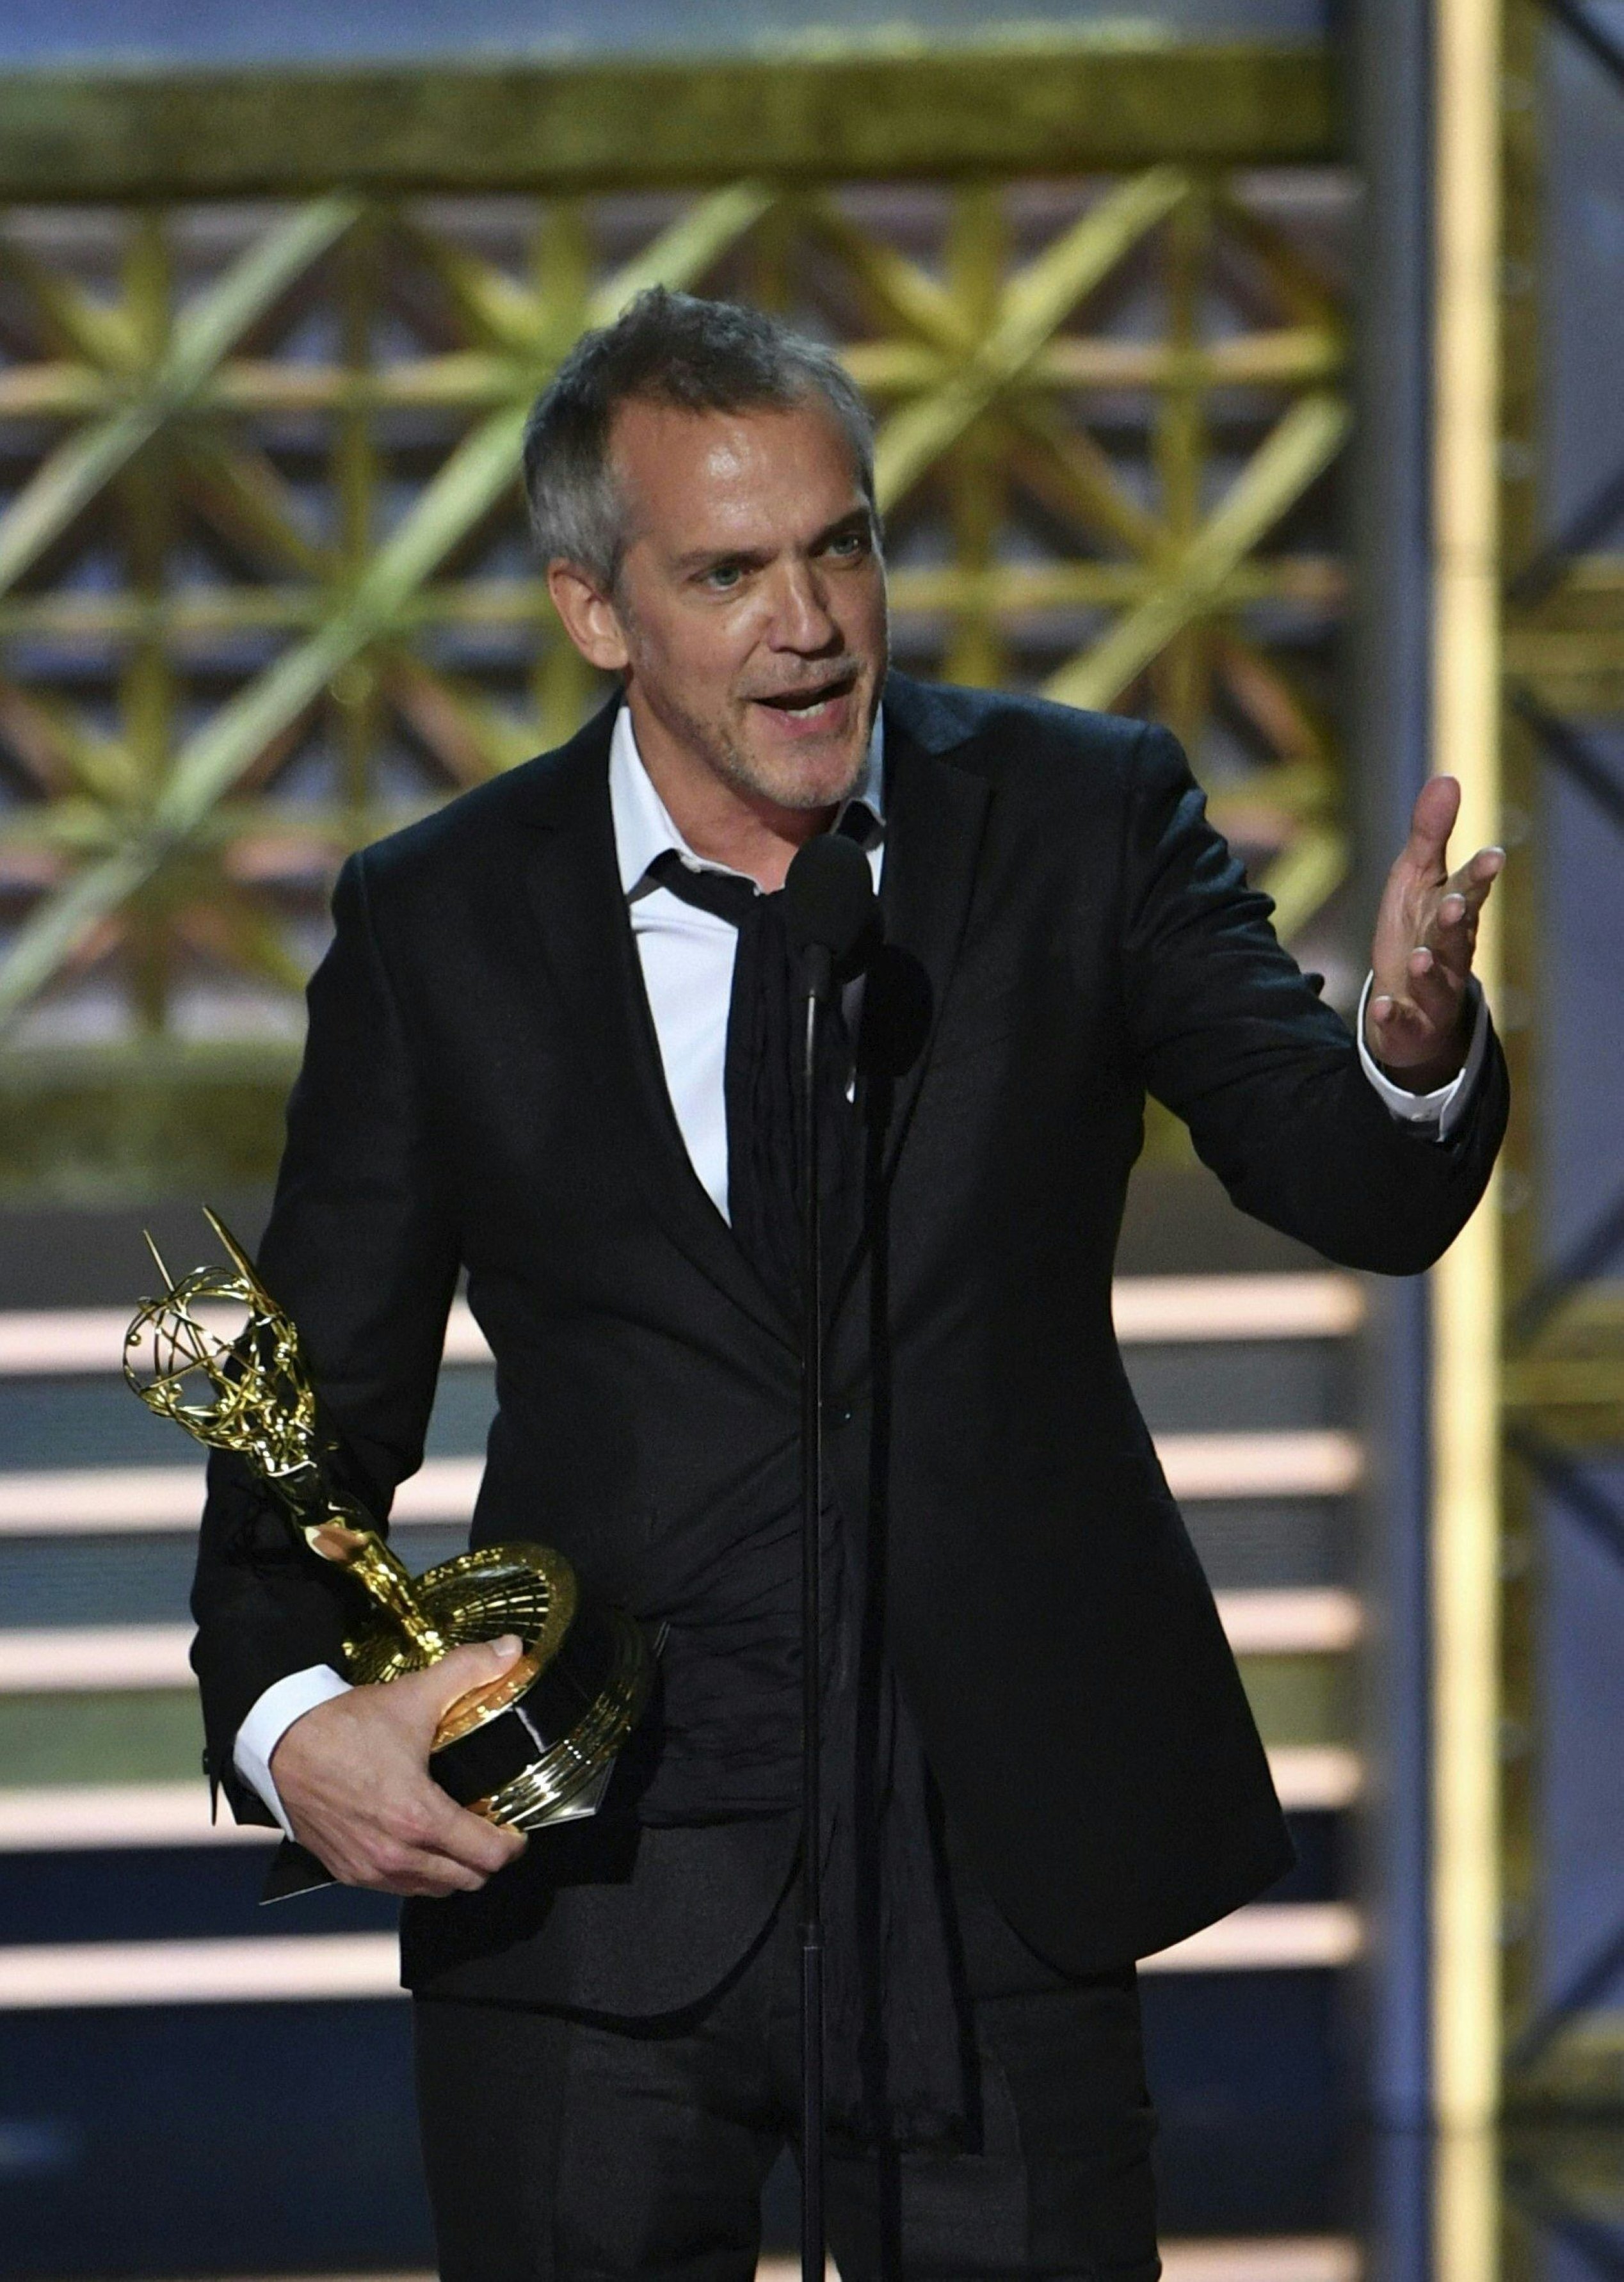 Jean-Marc Vallee accepts the award for Outstanding Directing for a Limited Series or Movie for 